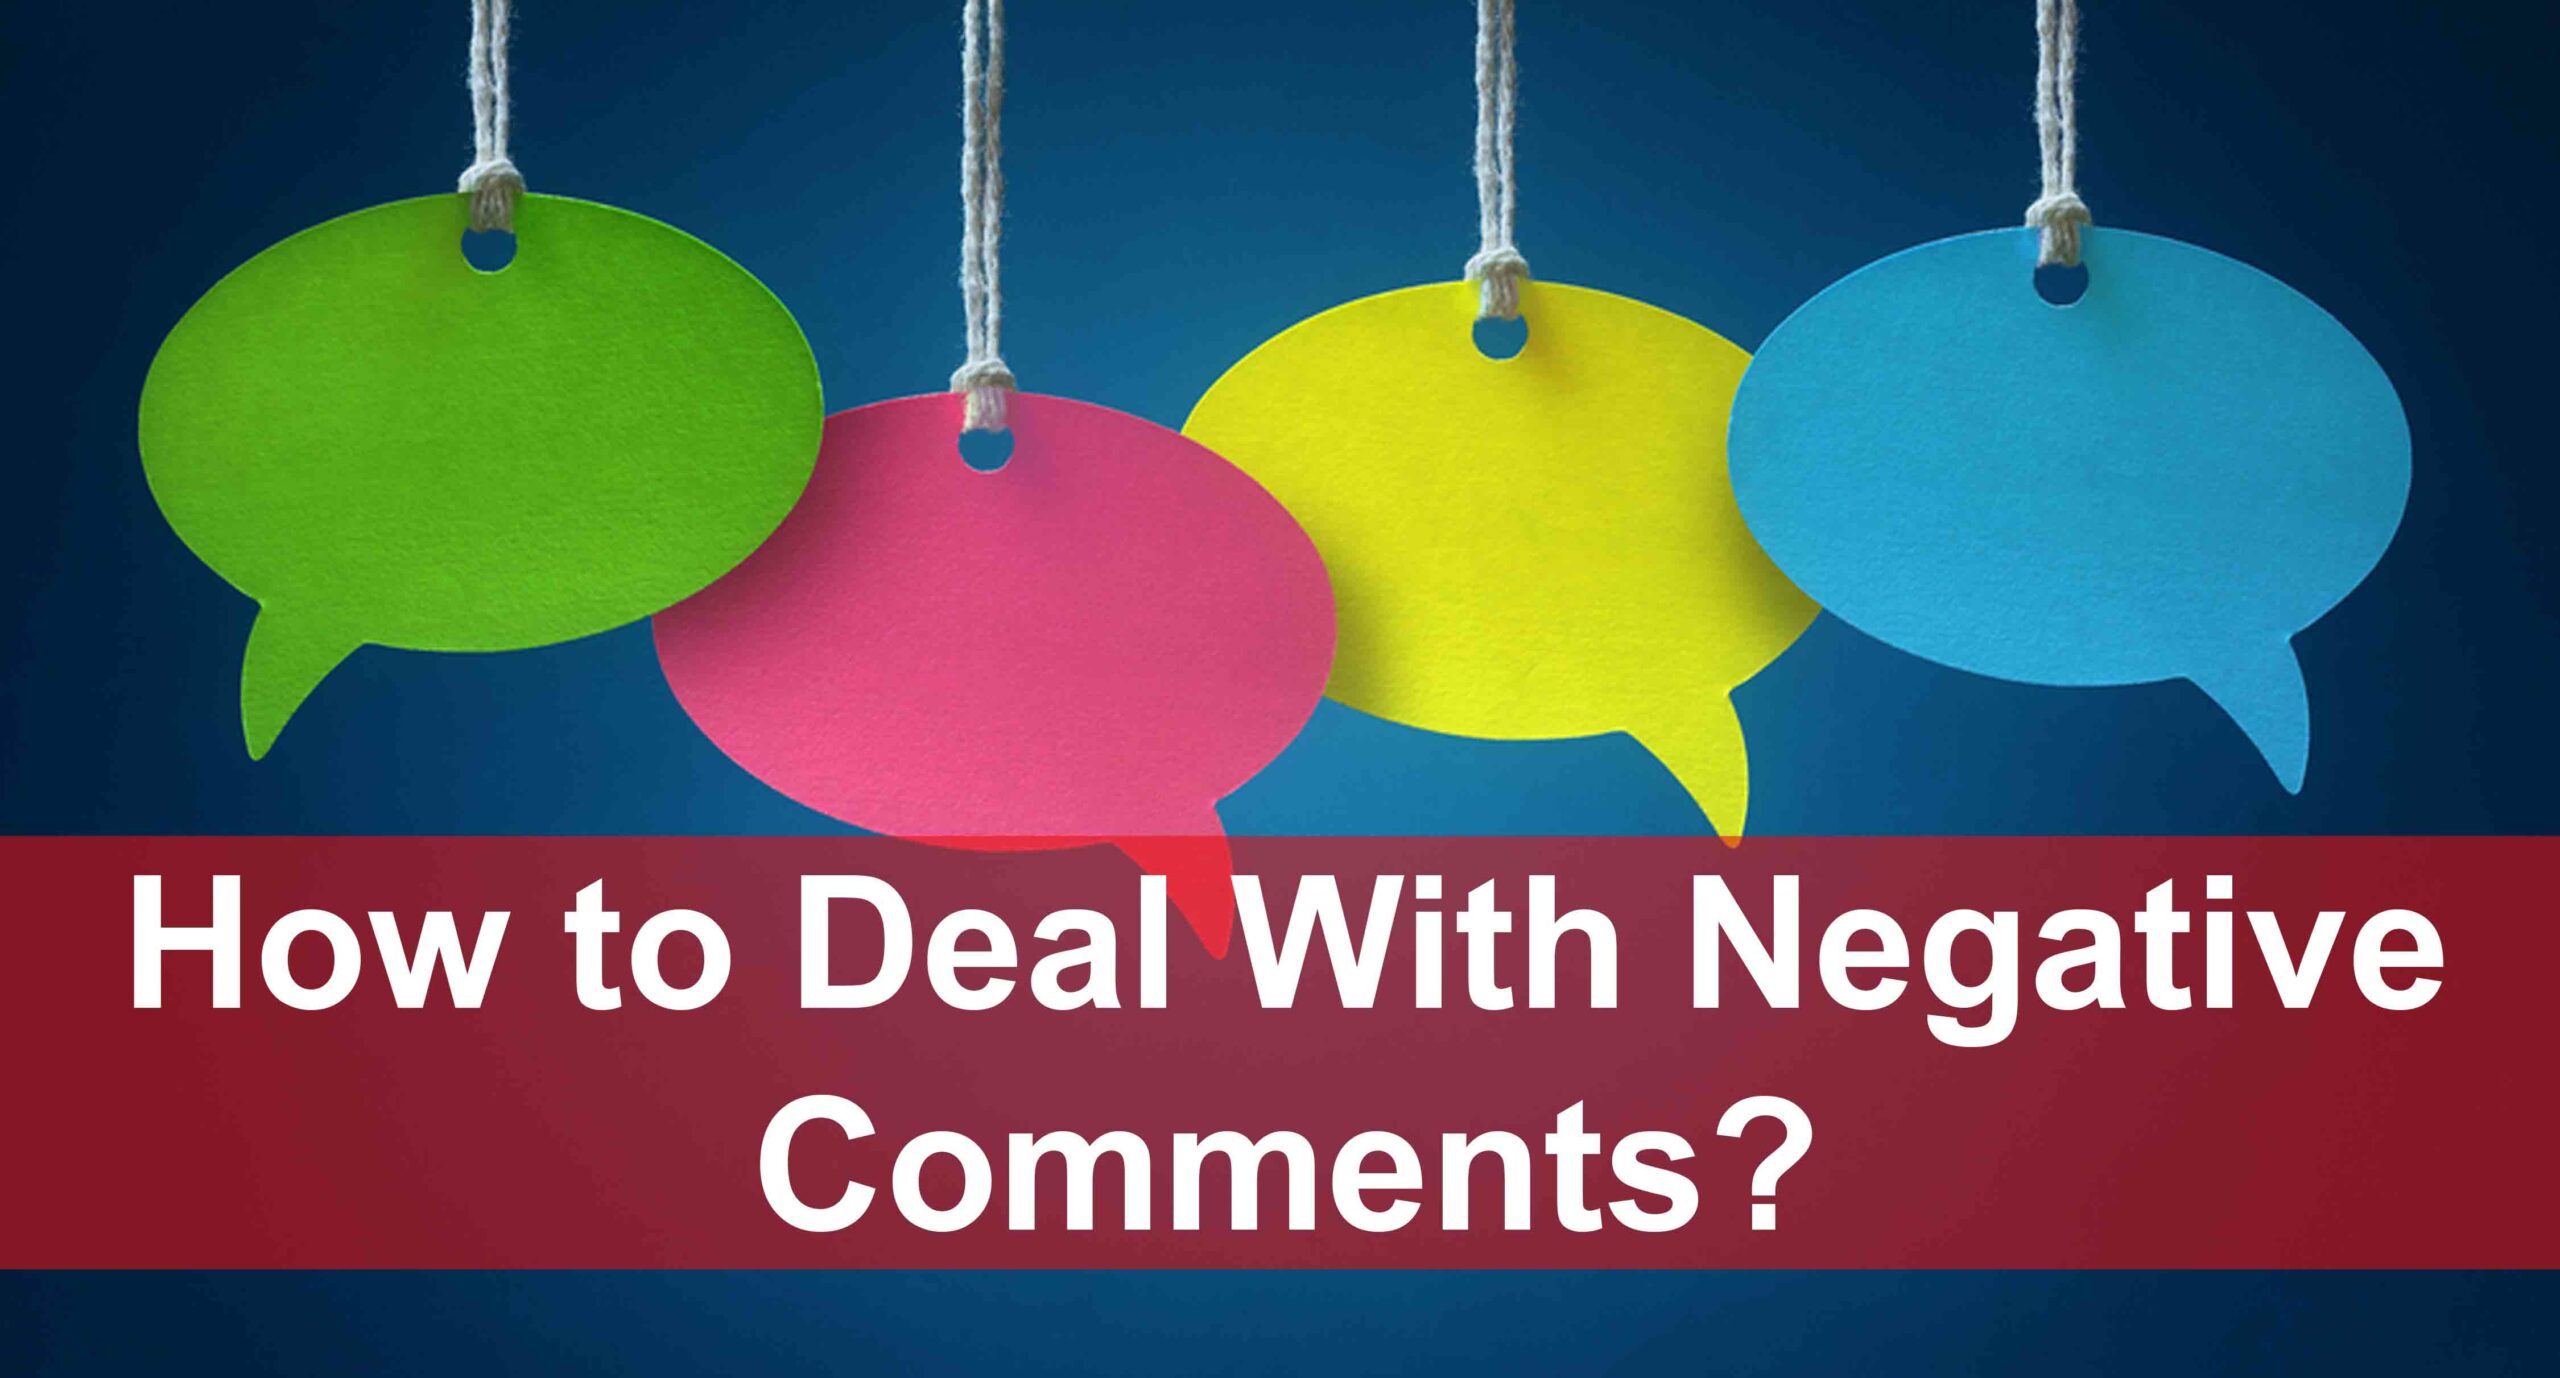 How to Deal With Negative Comments